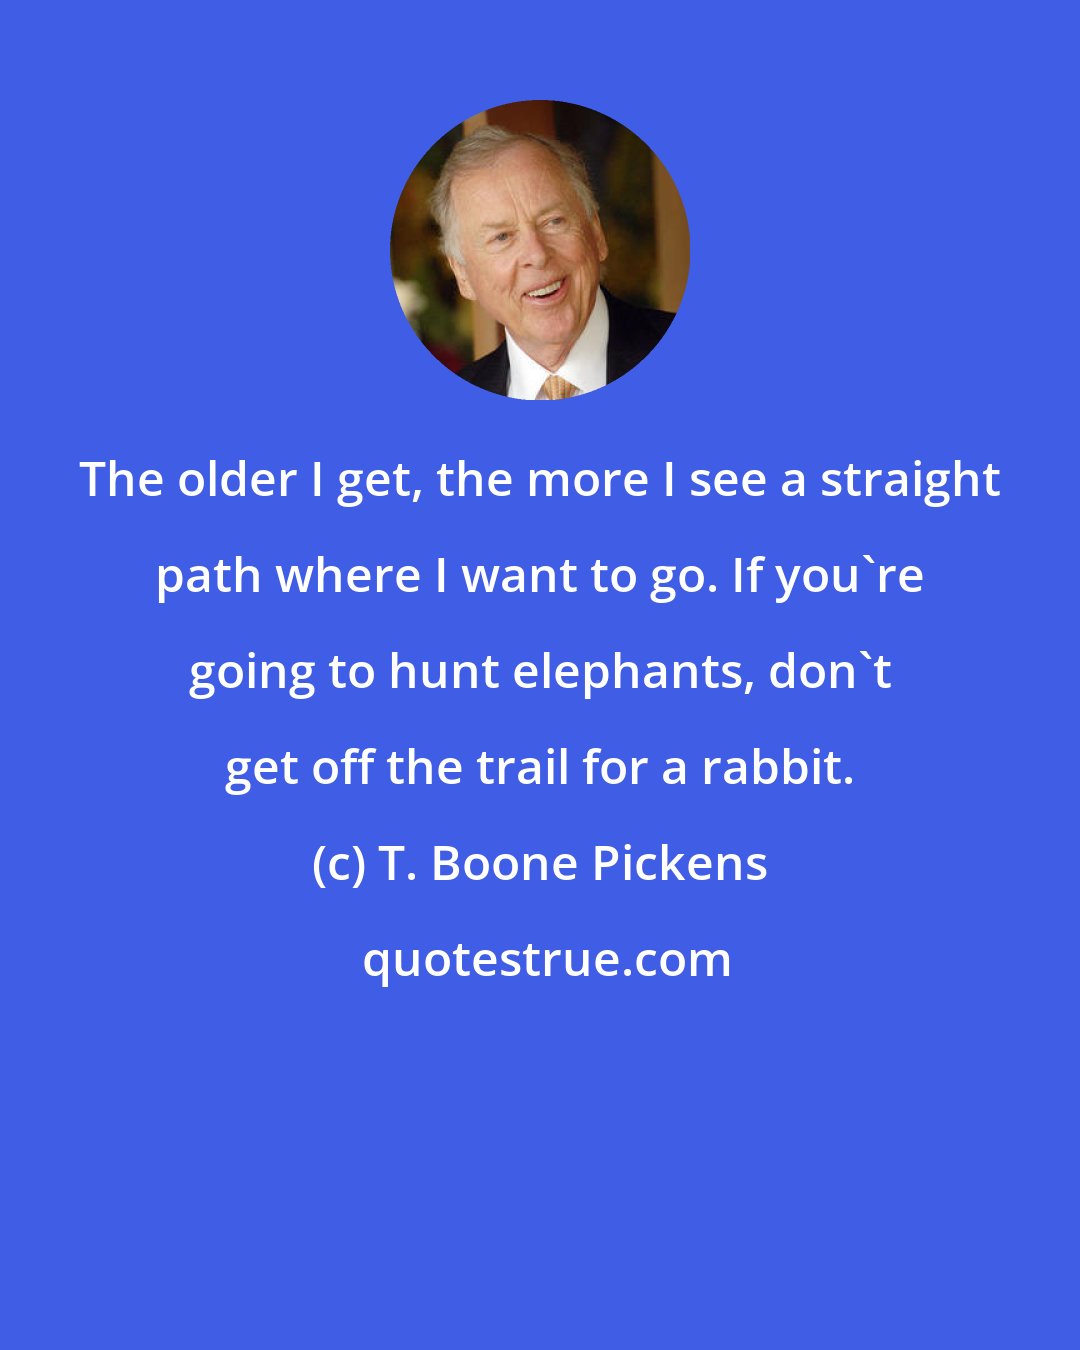 T. Boone Pickens: The older I get, the more I see a straight path where I want to go. If you're going to hunt elephants, don't get off the trail for a rabbit.